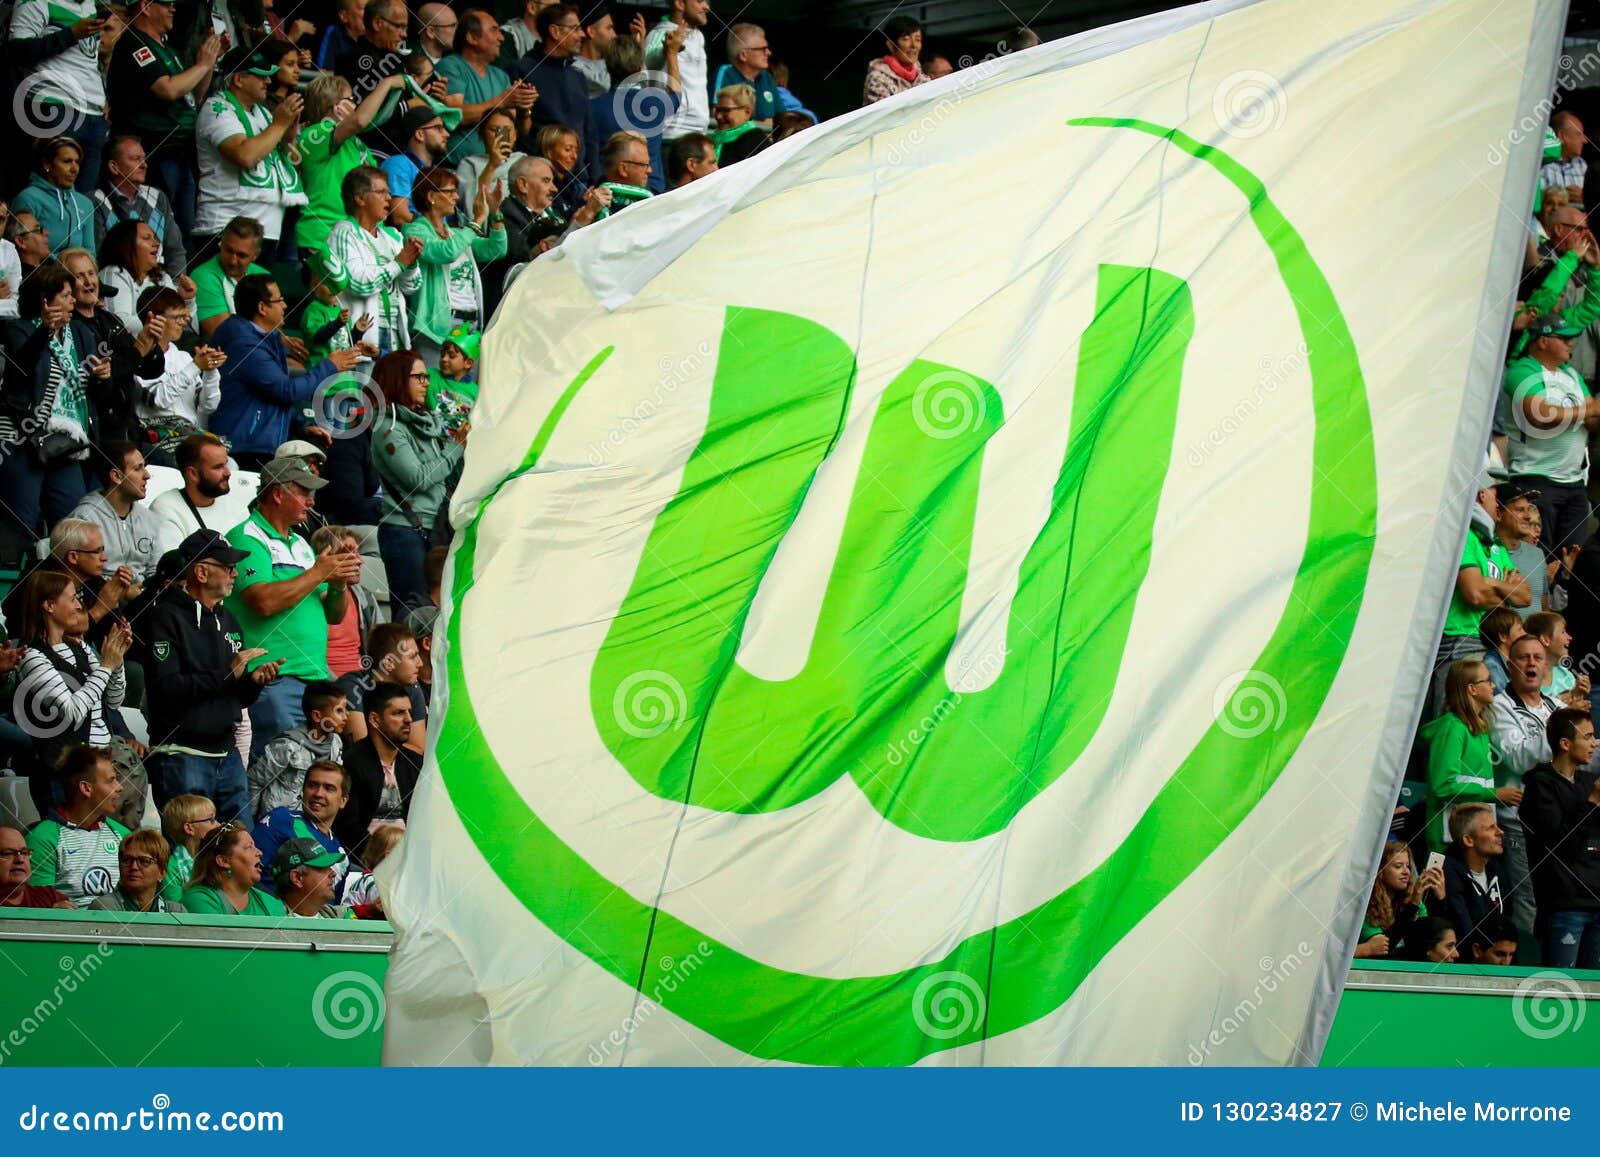 Large Flag the VfL Wolfsburg Fans Editorial Photography - Image of germany, football: 130234827